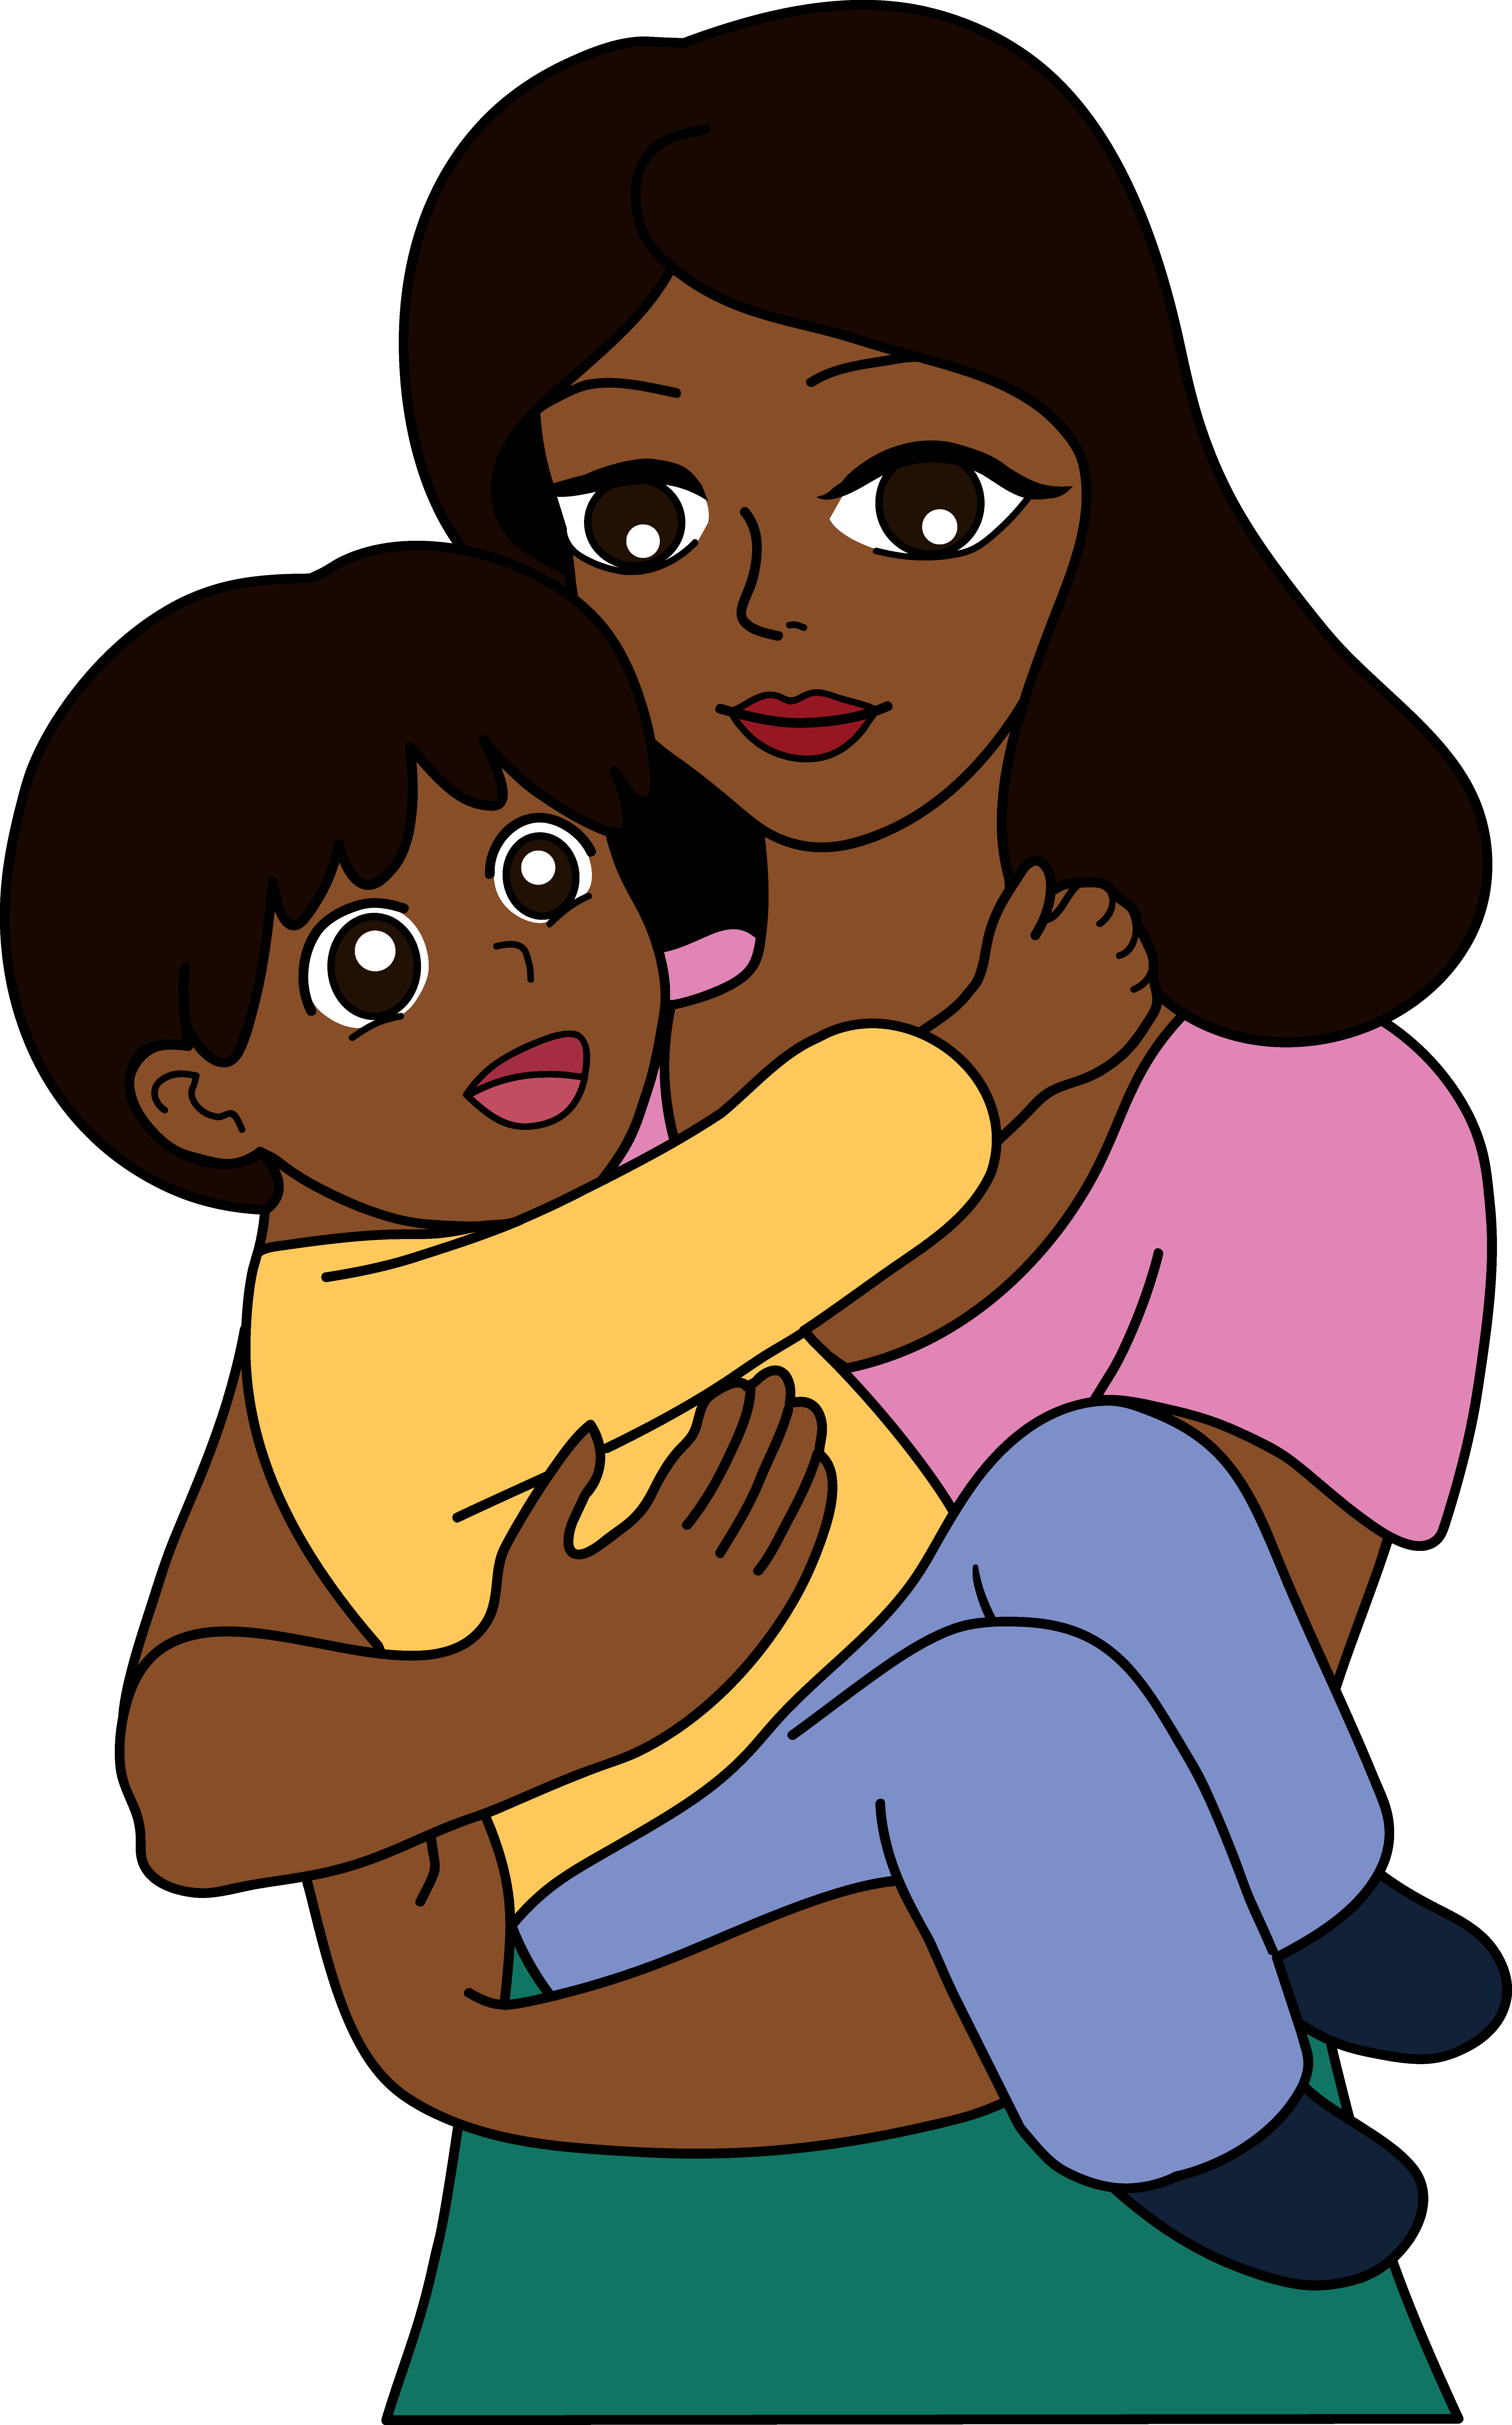 Clip Arts Related To : mom and dad clip art. view all Family Mom Cliparts)....